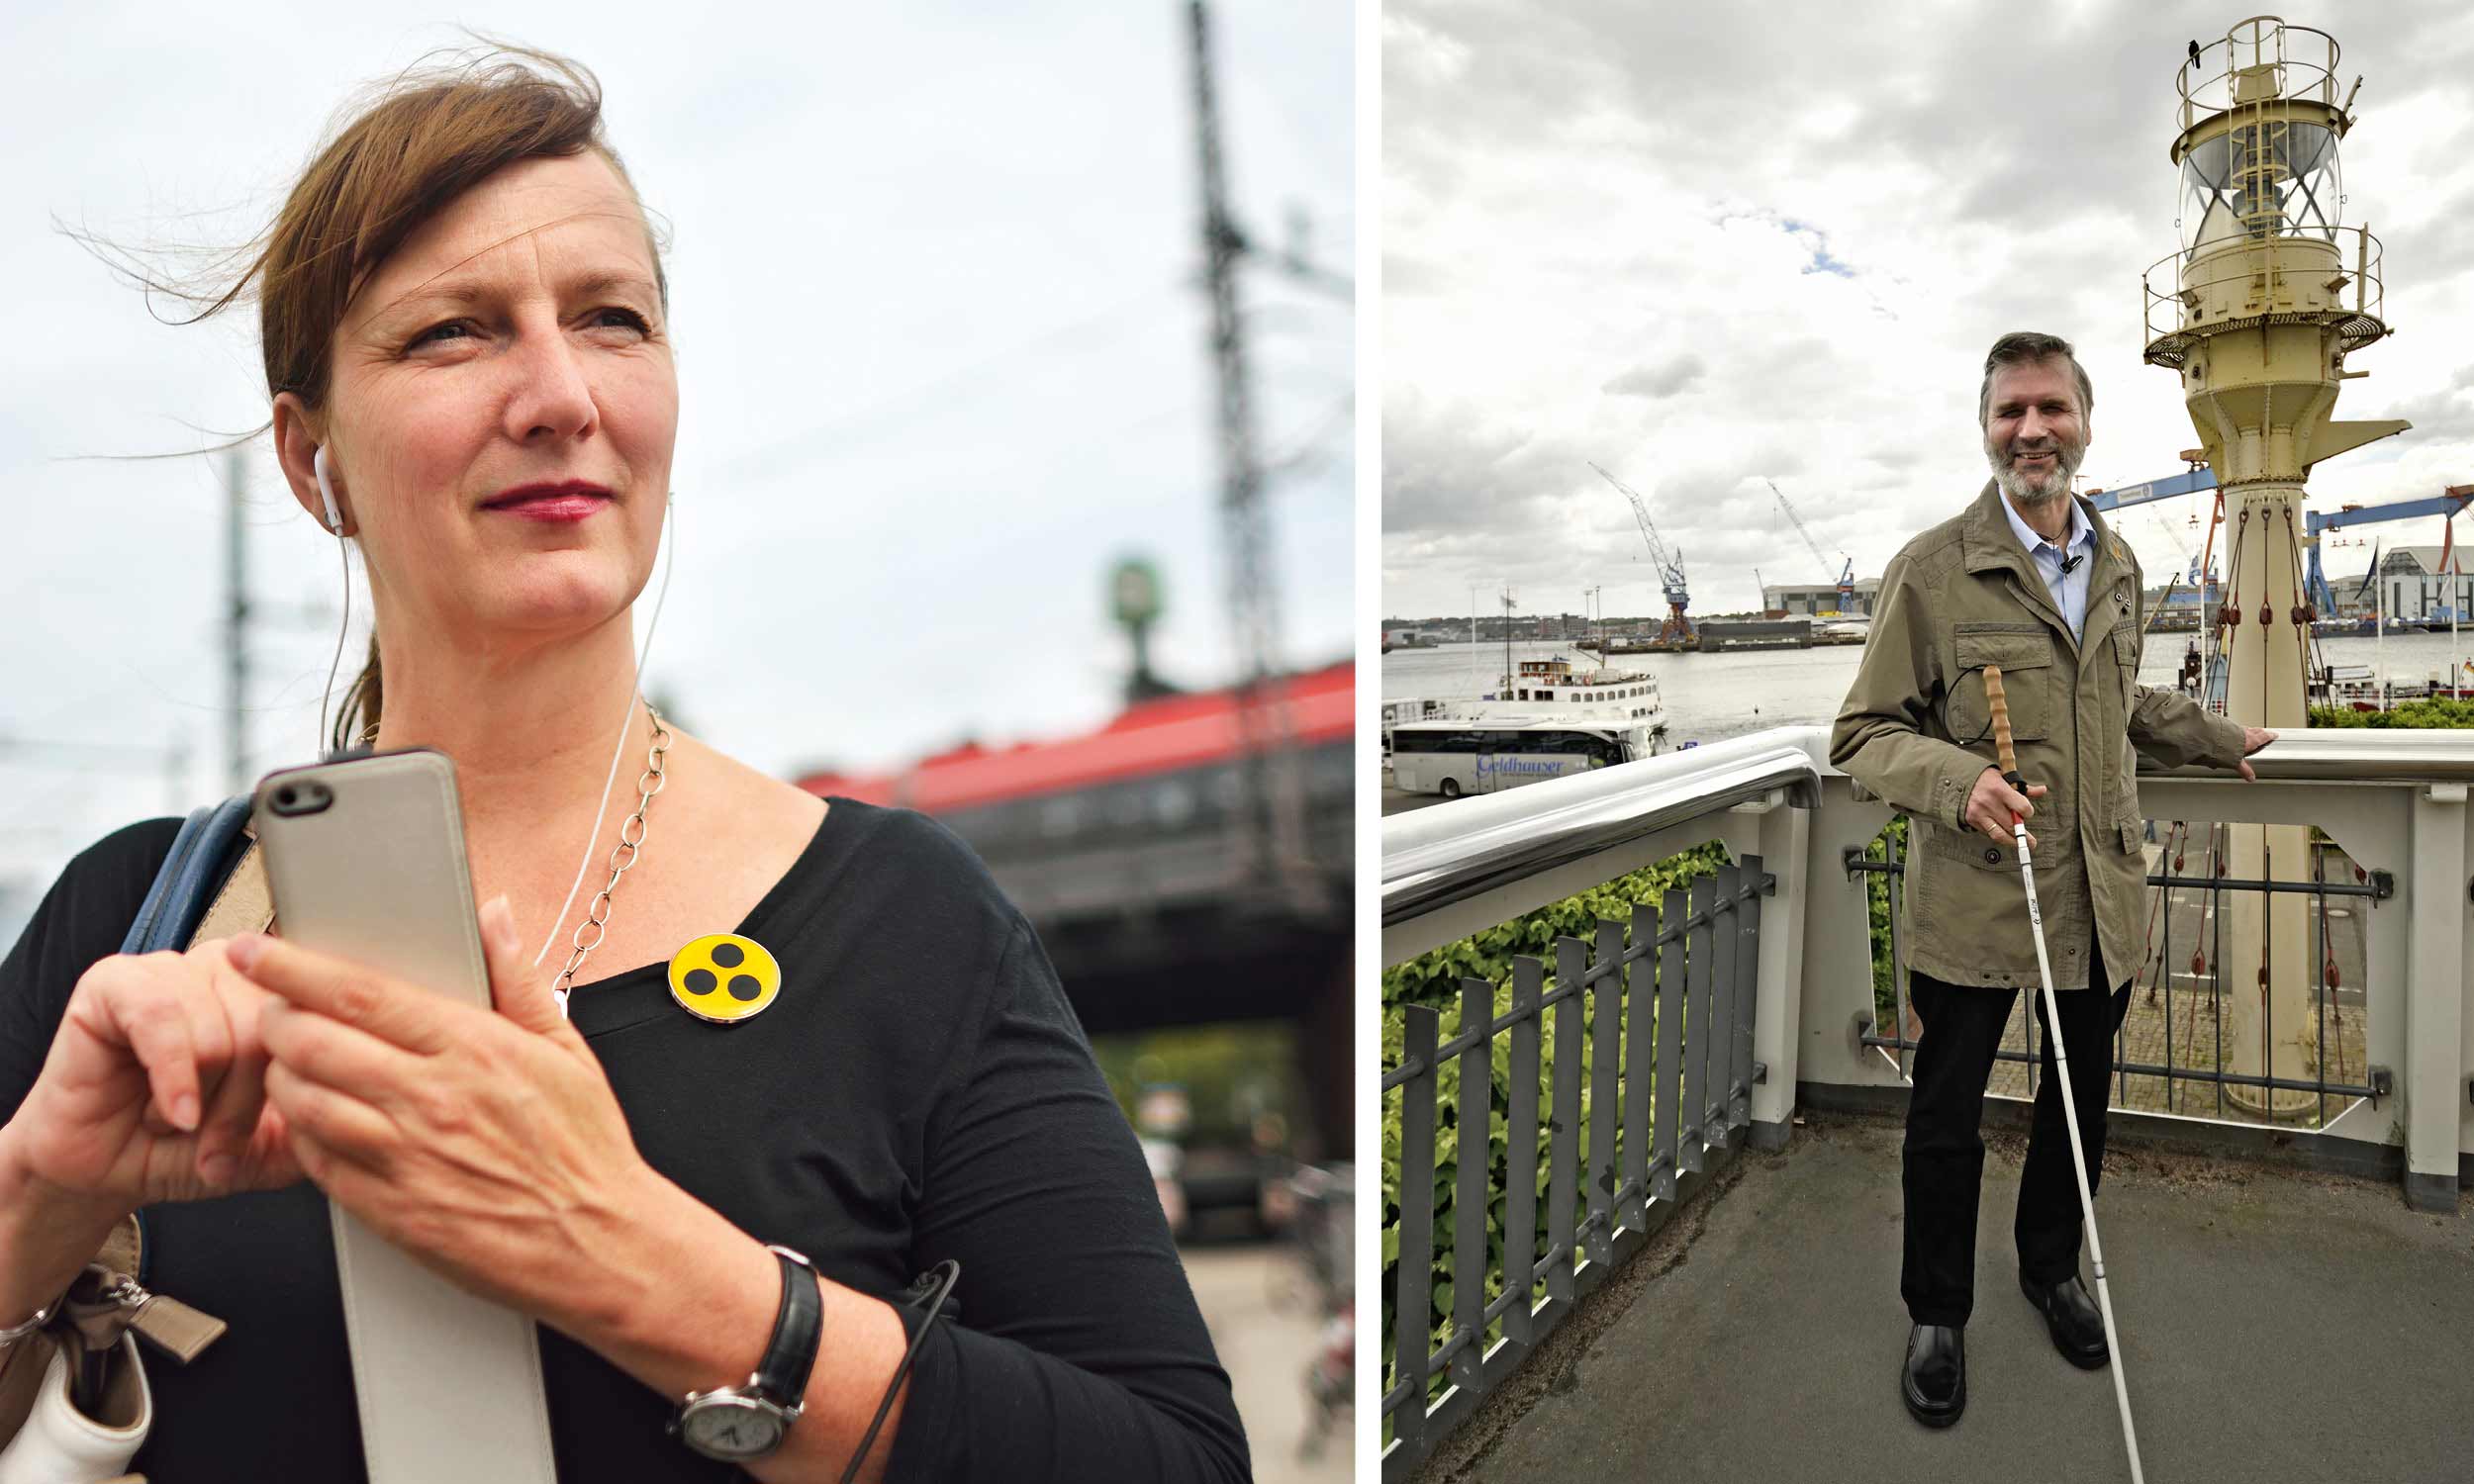 Two individual photos arranged side by side: On the left, a visually impaired woman with a mobile phone in her hand and headphones in her ear. In the background a bridge on which a red train is running. On the right, a blind man with a long cane in his hand in front of a parapet. Behind, a harbour complex with ships, cranes and a lighthouse.